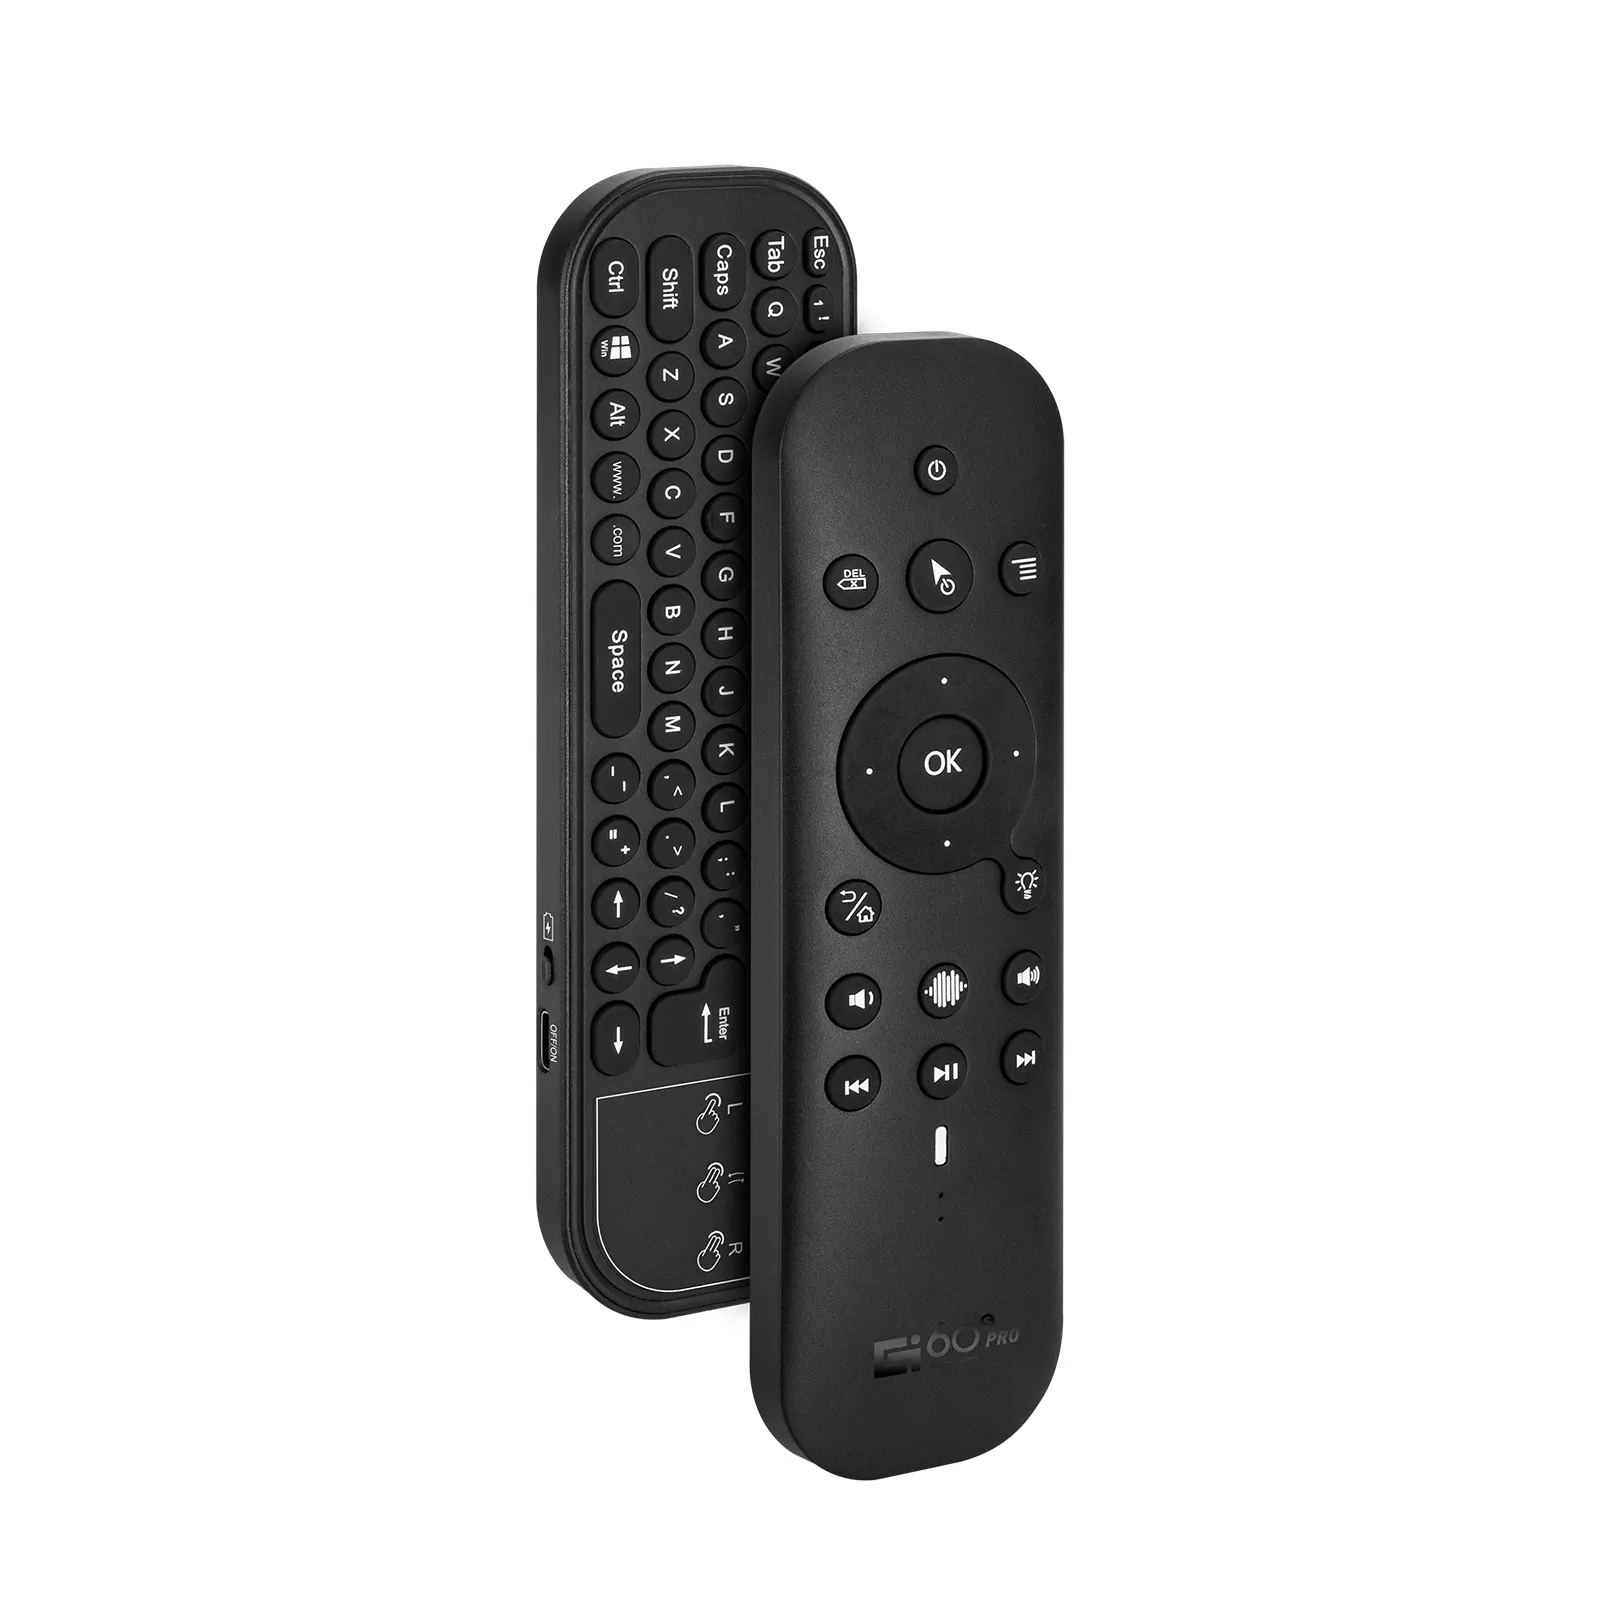 G60S PRO BT 2.4GHz wireless air mouse BT remote control Backlight MIni Keyboard gyroscope voice Touchpad for android tv box PC